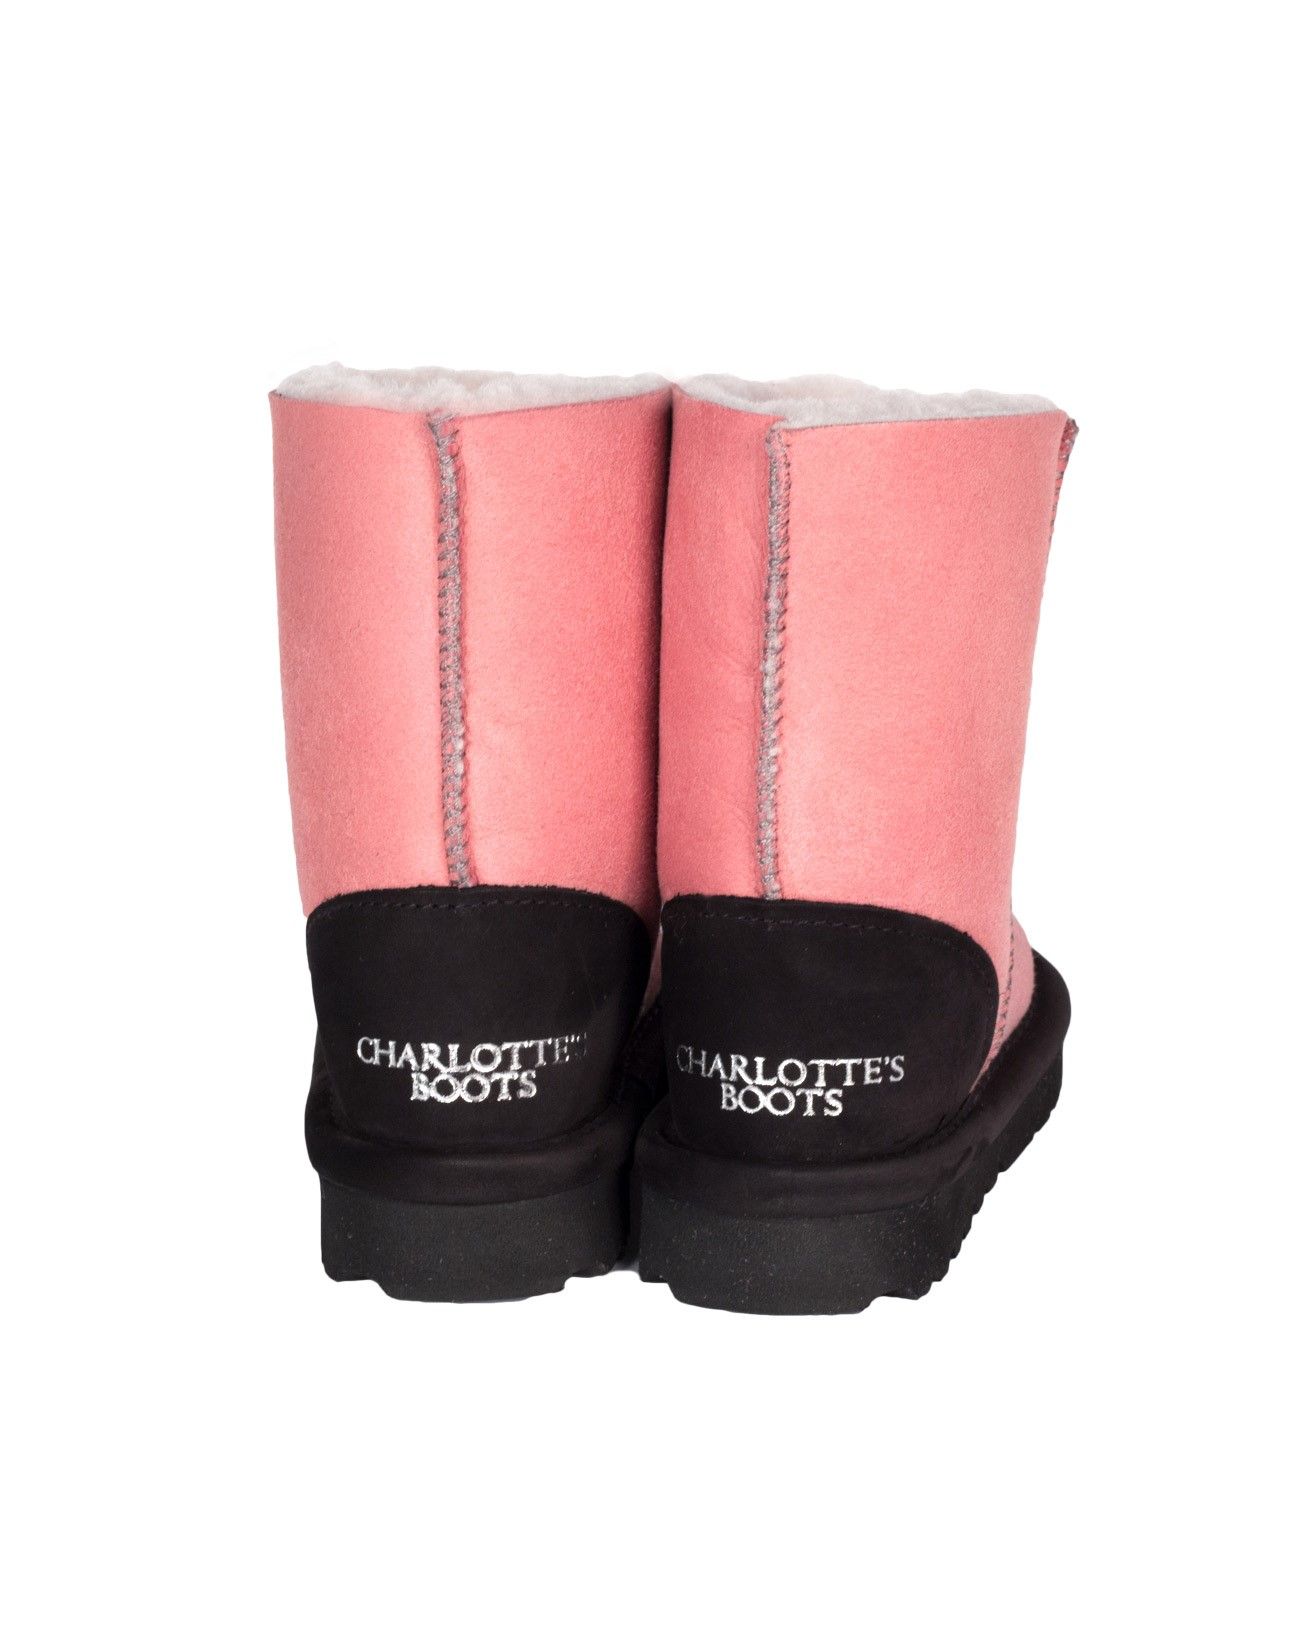 7331_personalised_pink boots_centralised.jpg